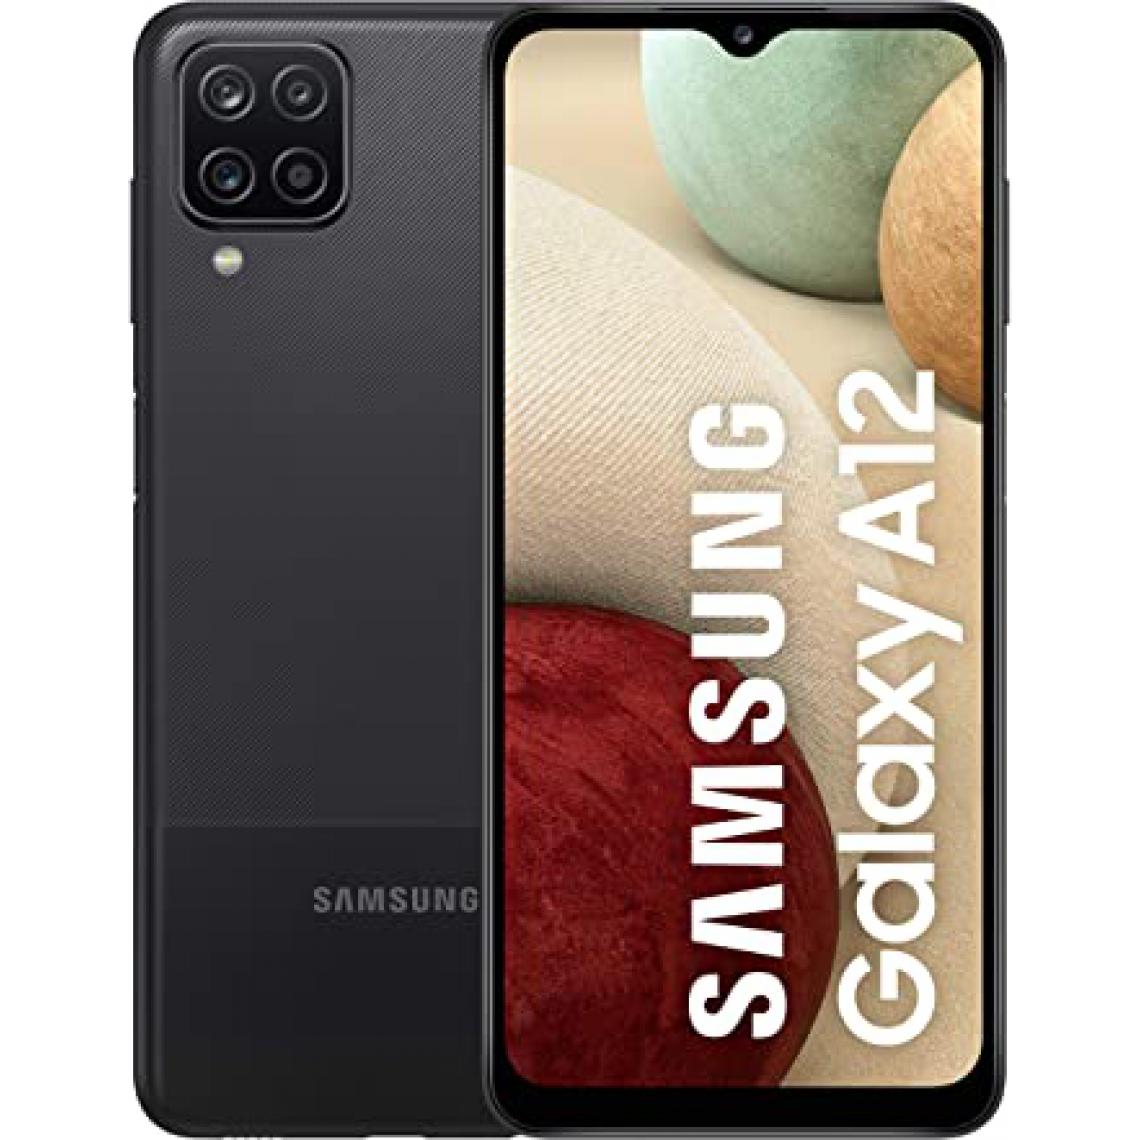 Samsung - Galaxy A12 32GO - Smartphone Android